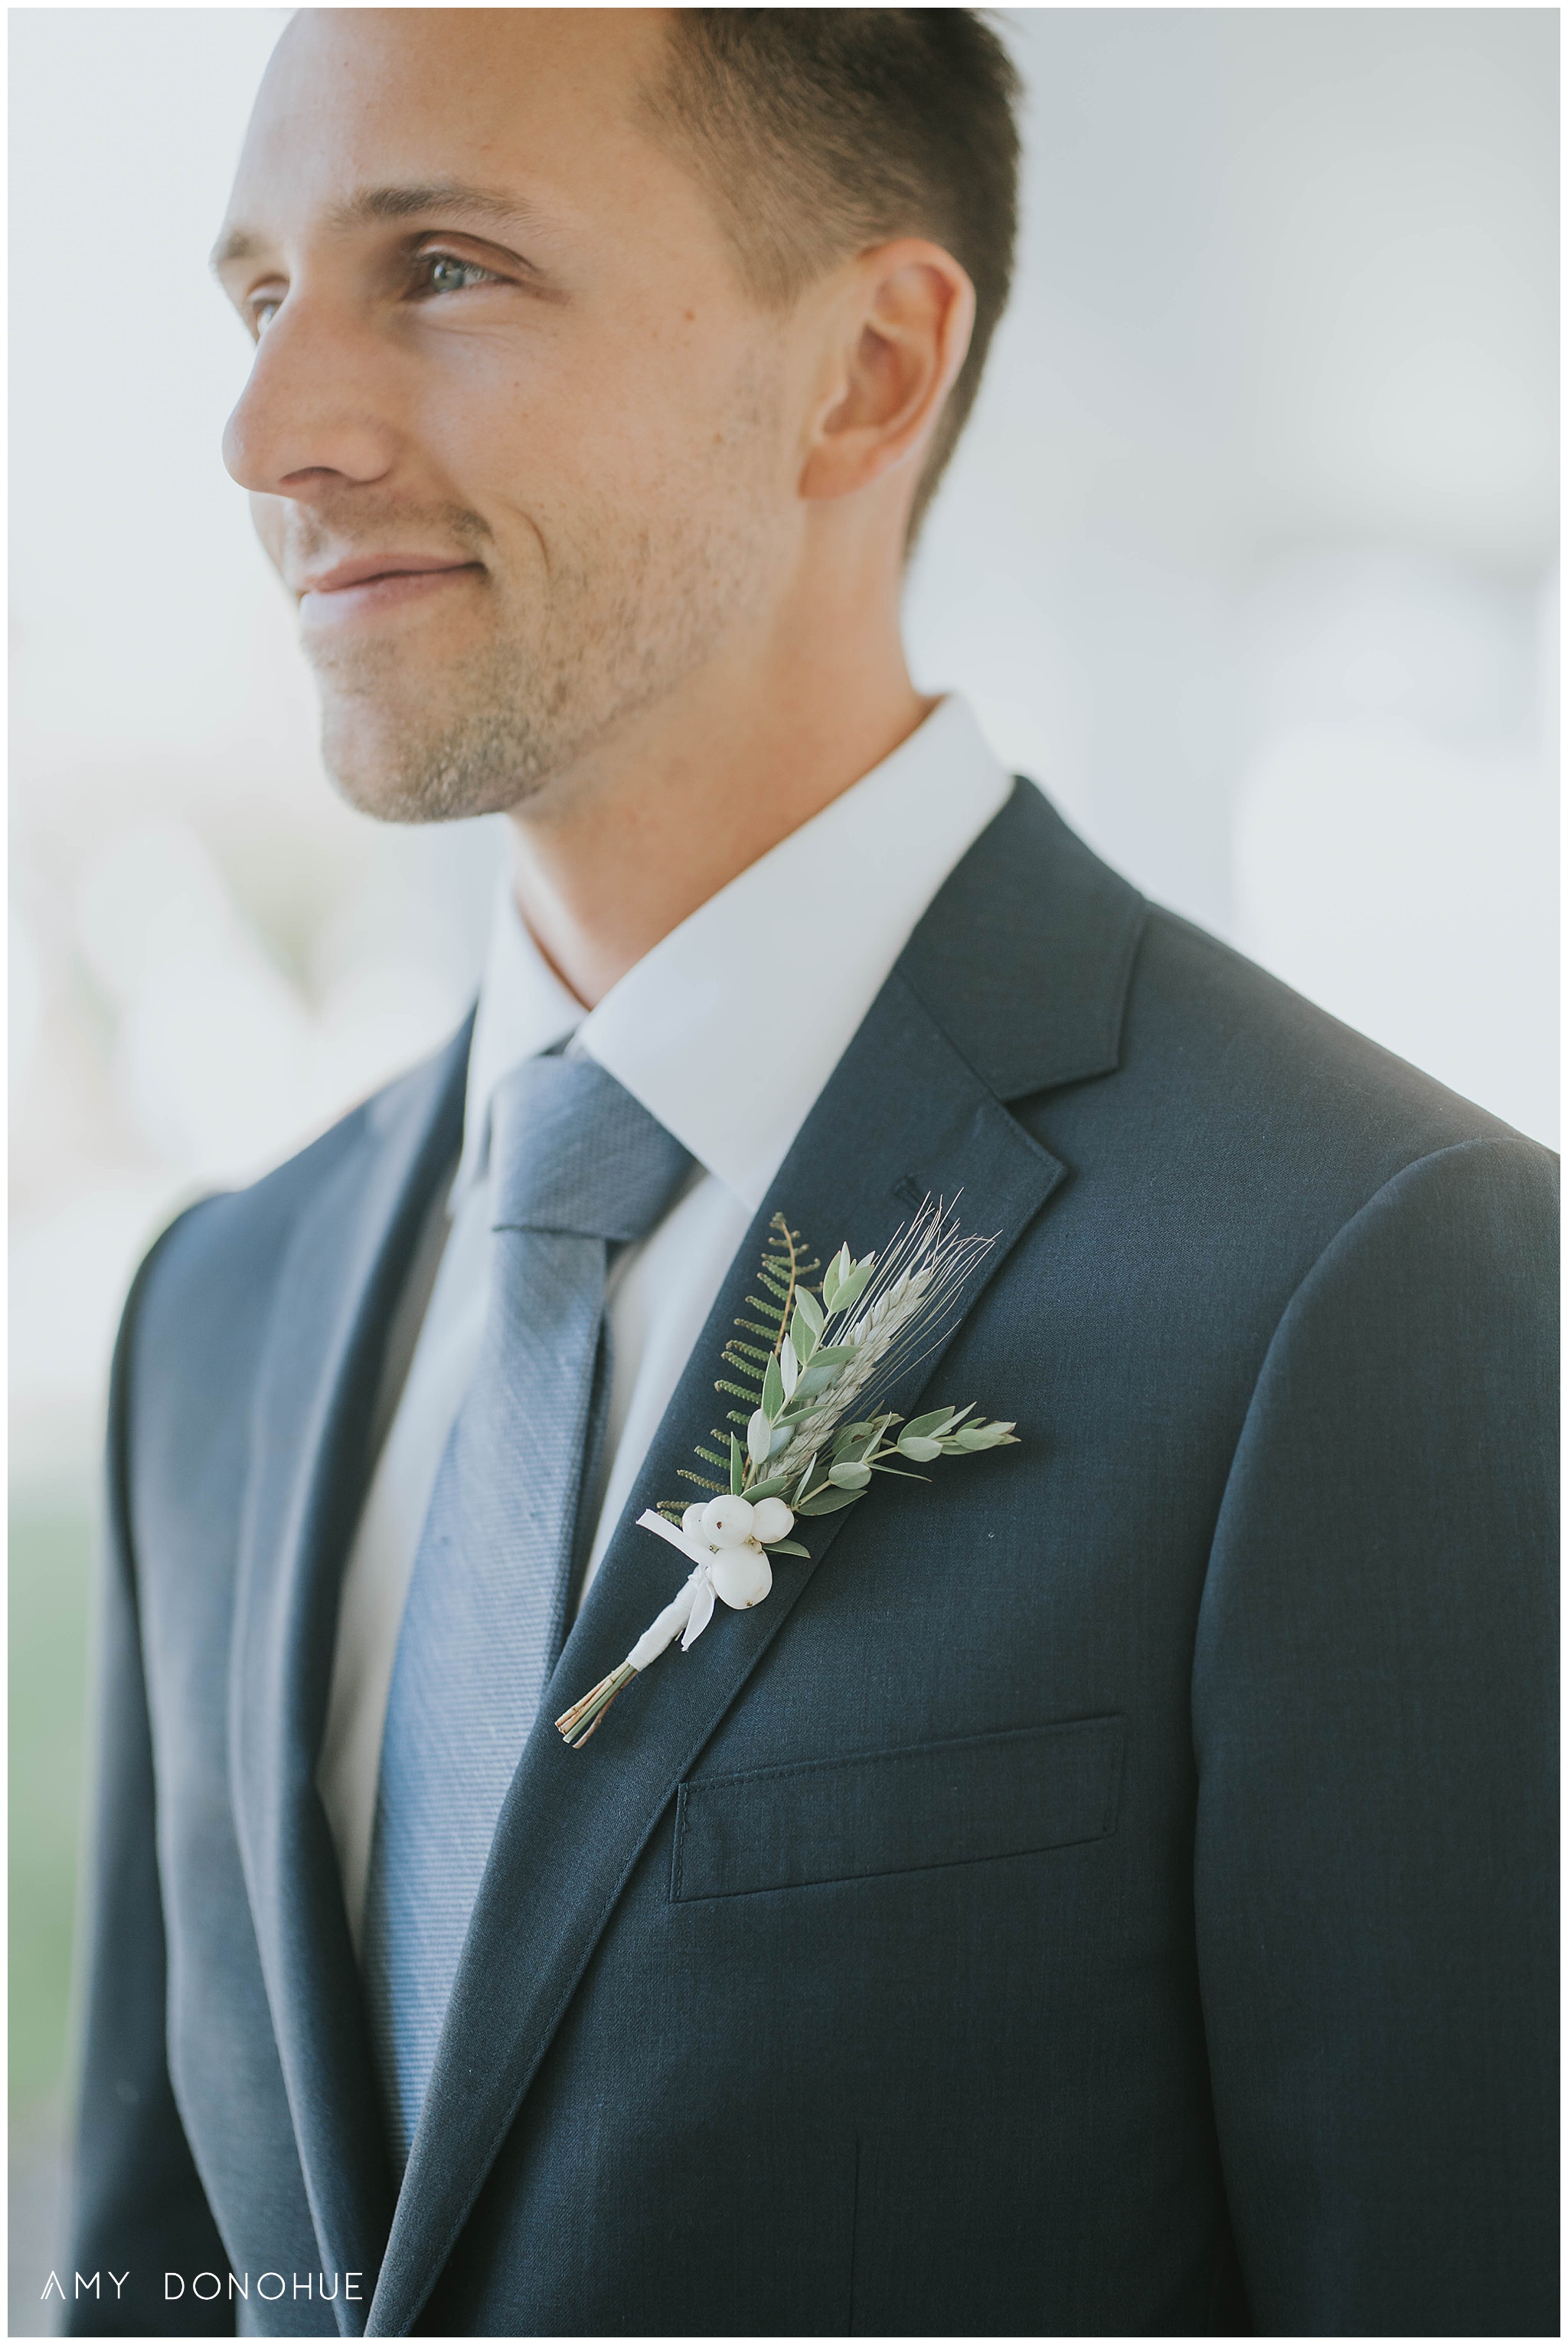 Groom boutonnière by Jasper and Prudence at the Equinox Resort Wedding | Vermont Wedding Photographer | © Amy Donohue Photography